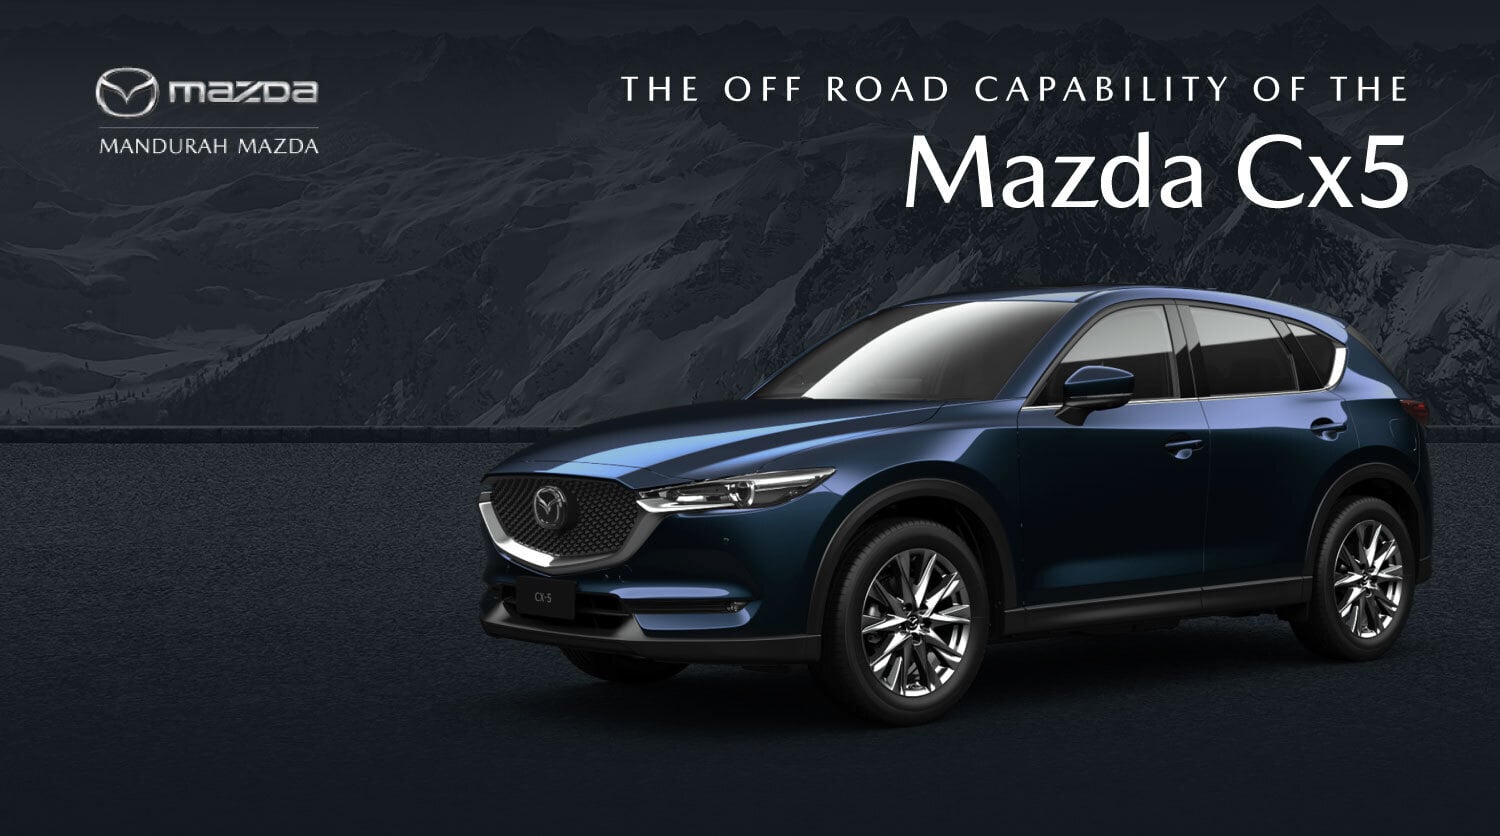 2019 Mazda CX-5 Technology Features, Mazda Technology